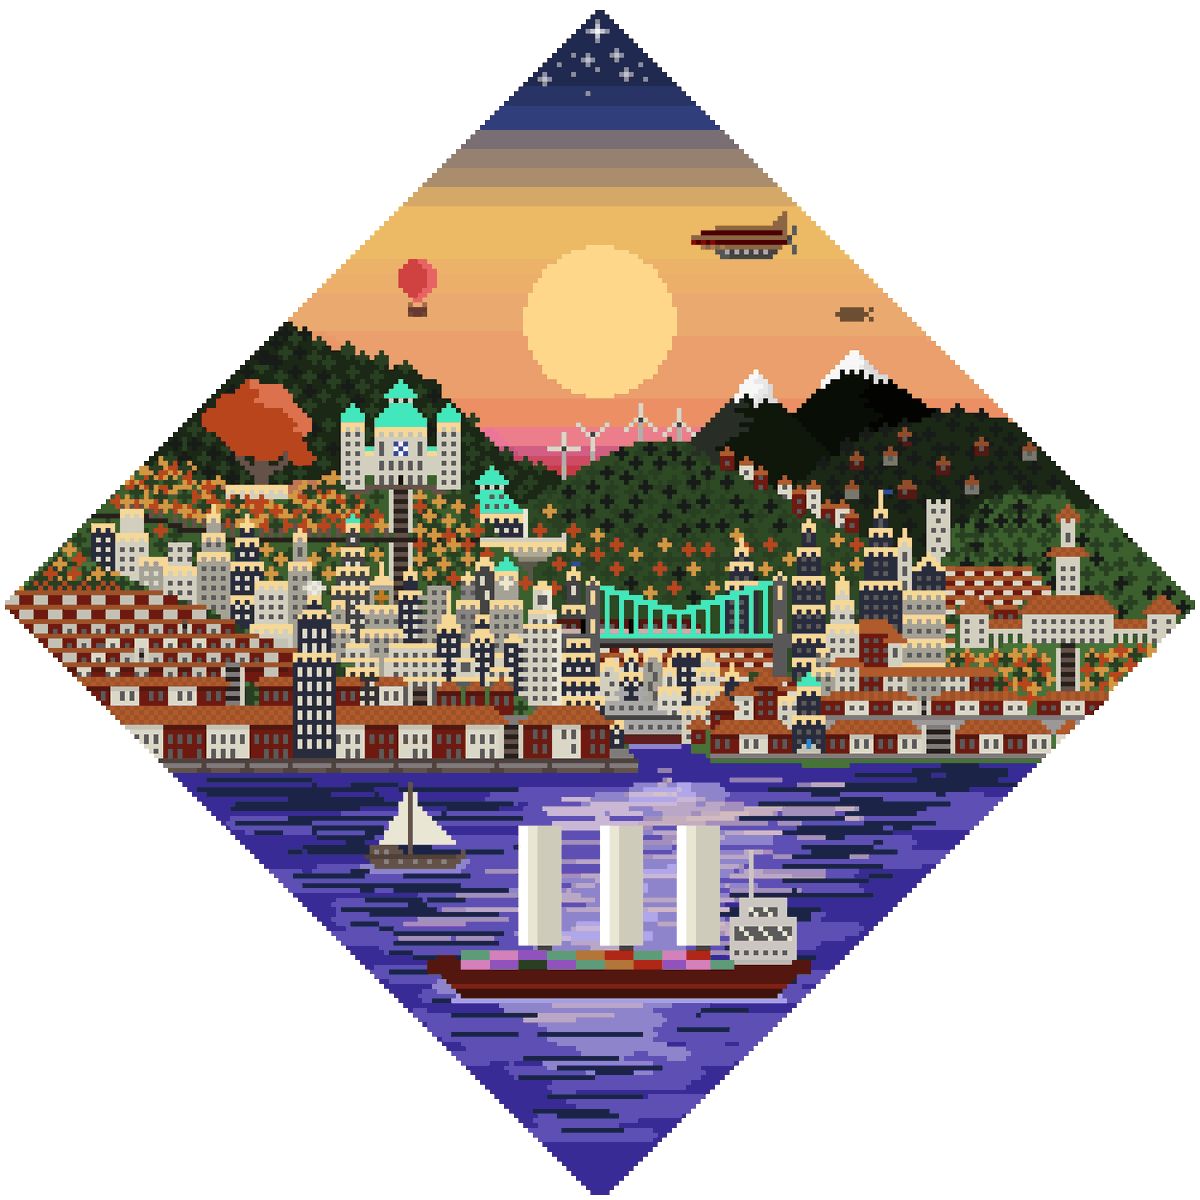 Solarpunk Cities - The entire collection (for now?) #Pixelart #ドット絵 #aseprite